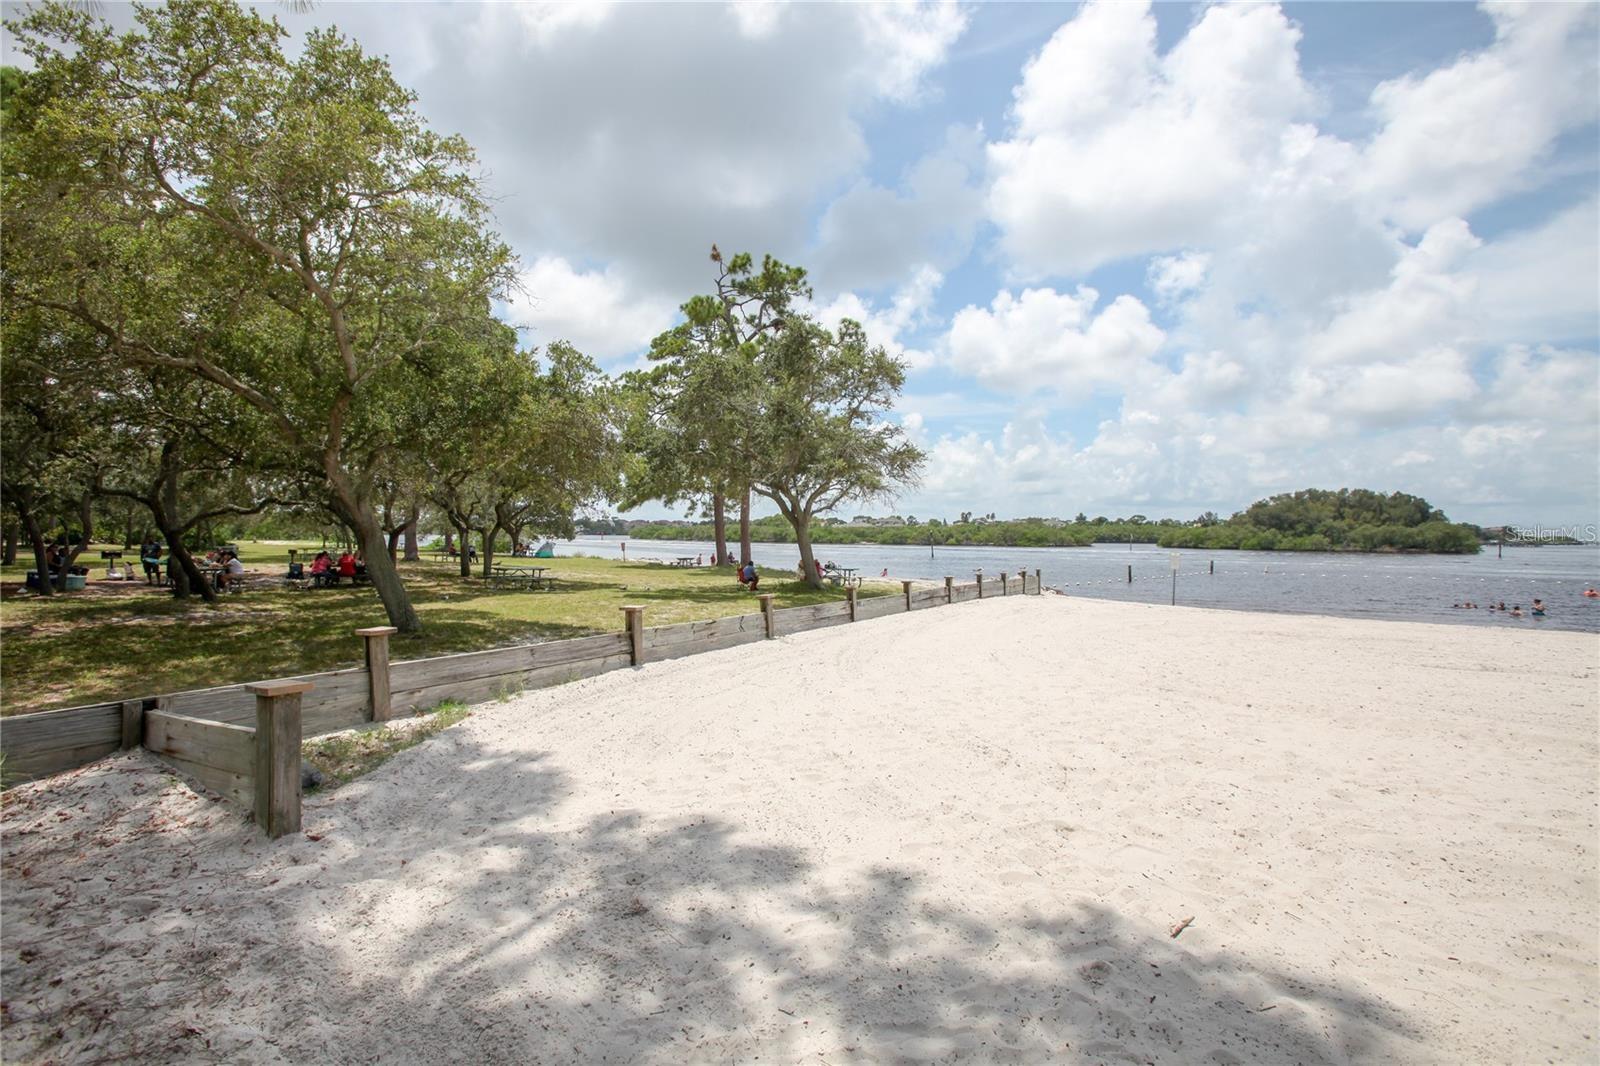 Anclote Park and part of the beach area